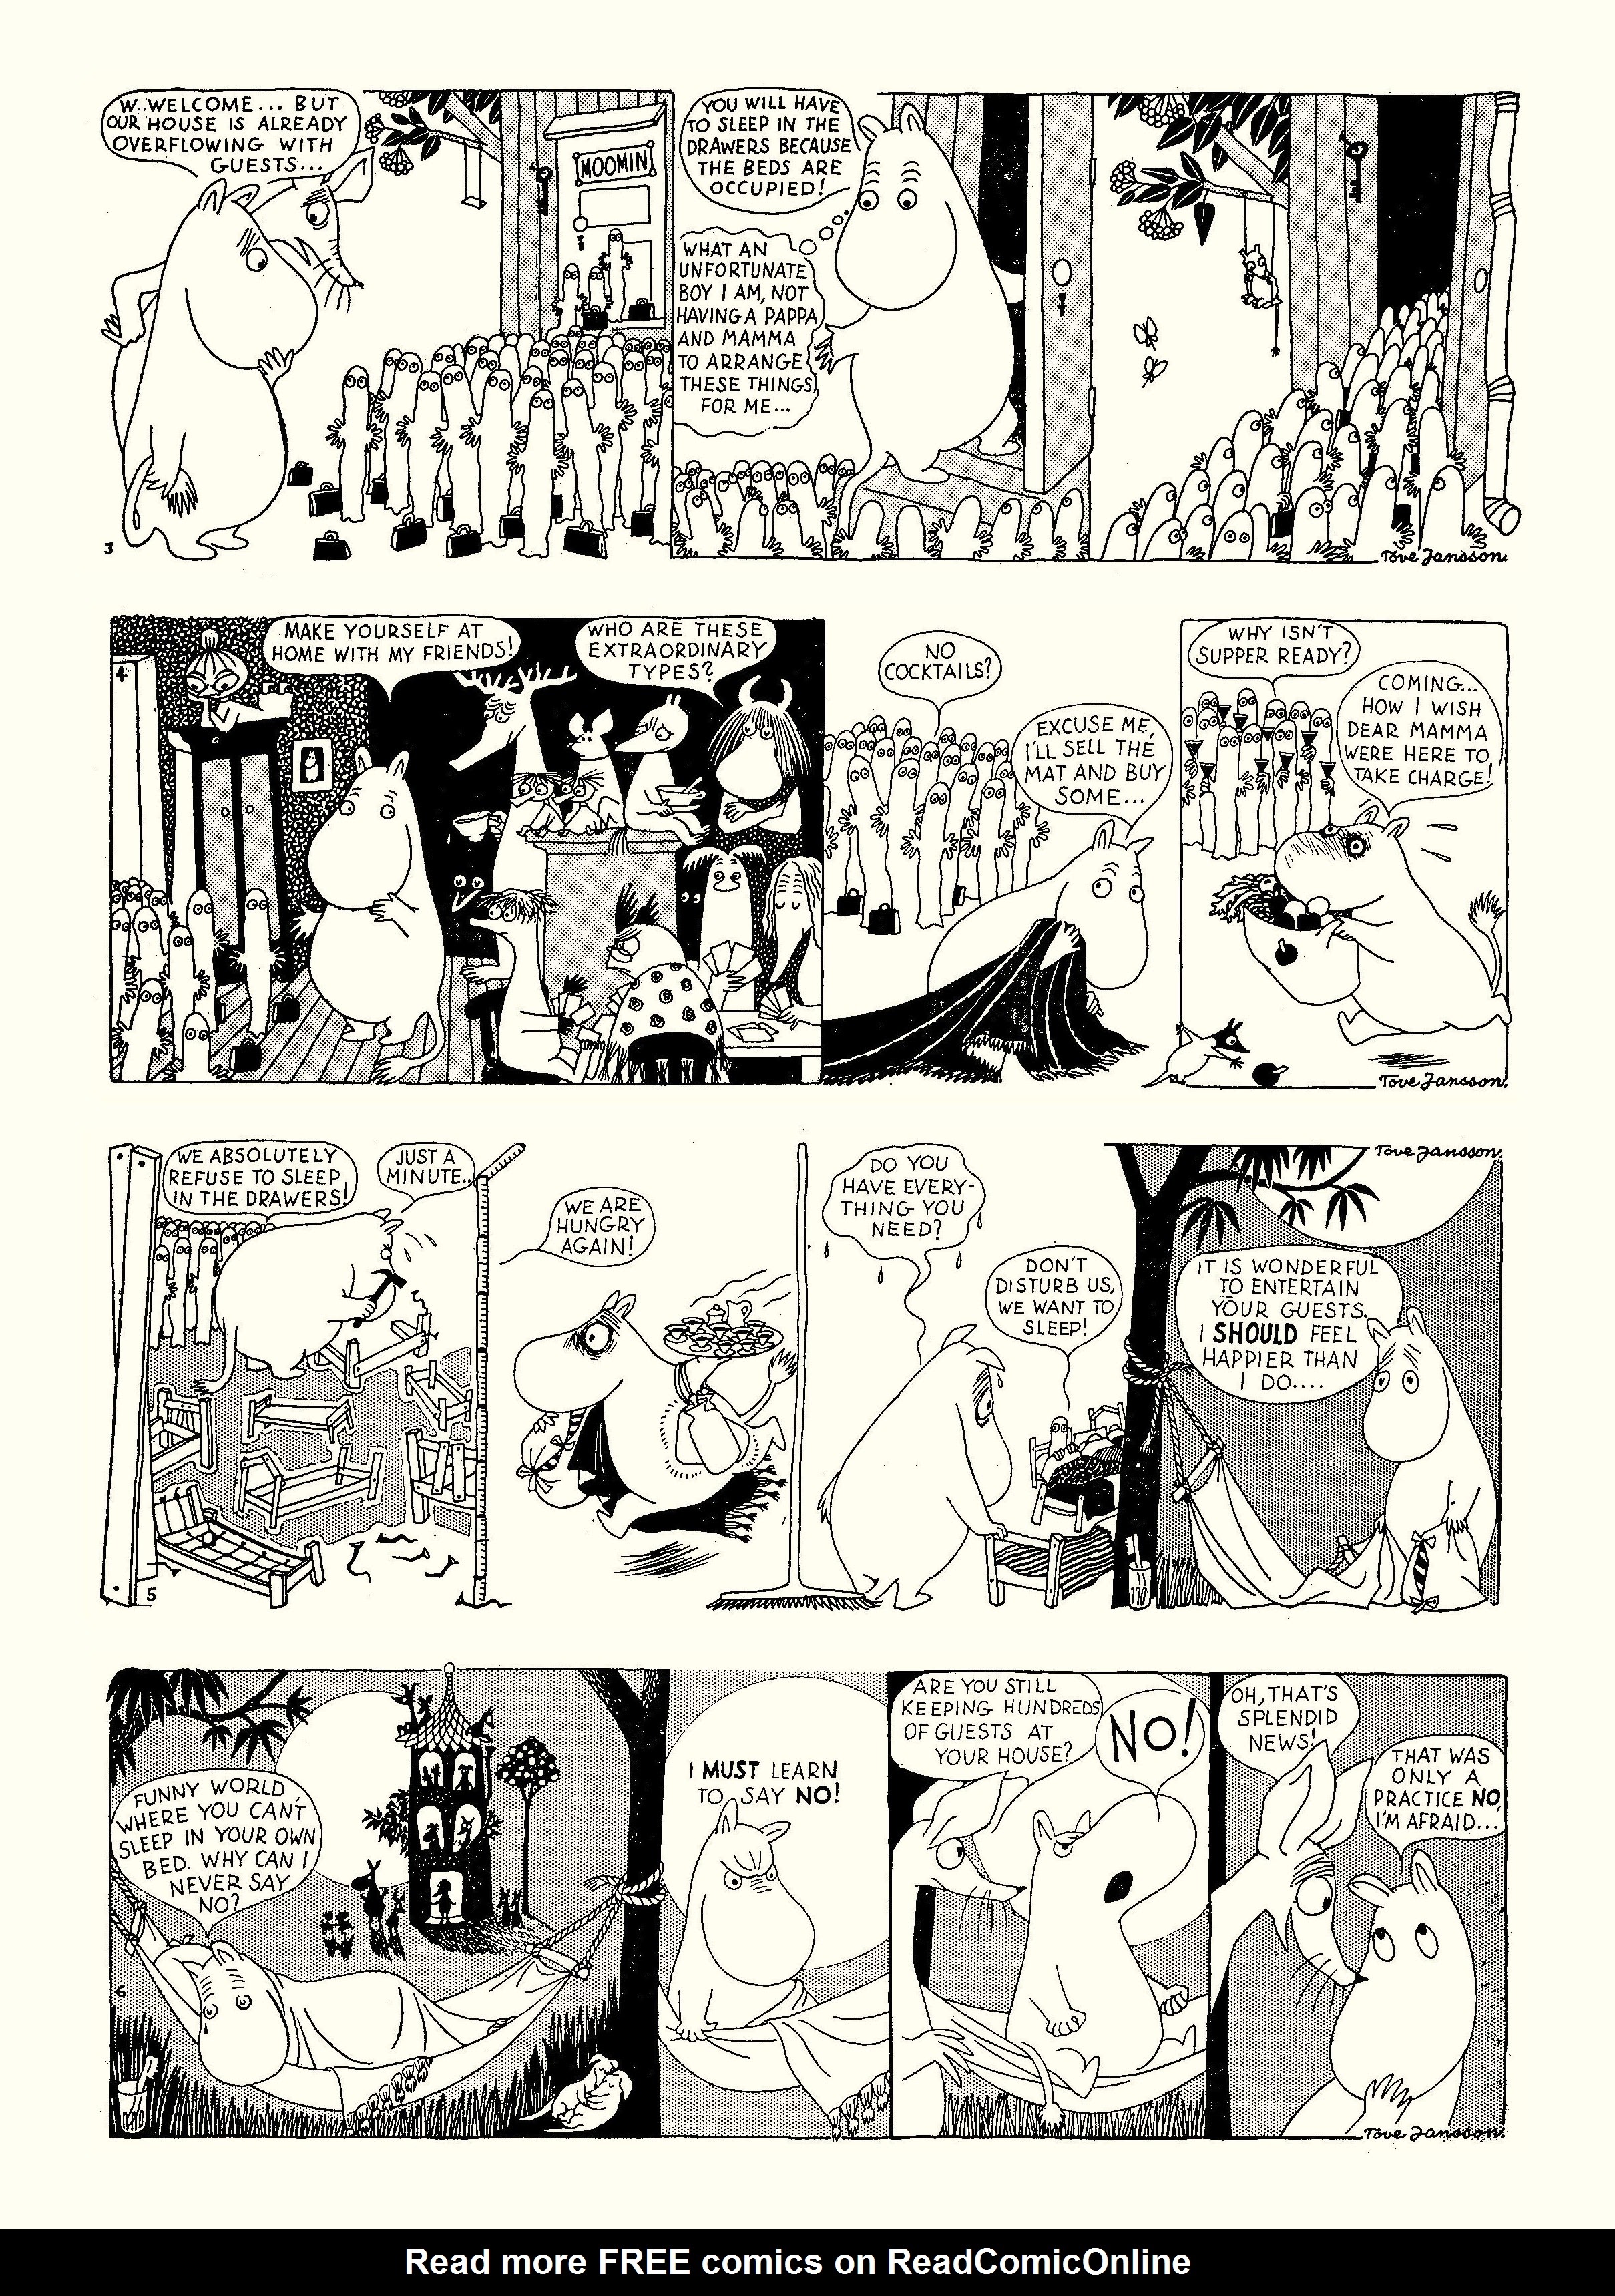 Read online Moomin: The Complete Tove Jansson Comic Strip comic -  Issue # TPB 1 - 7